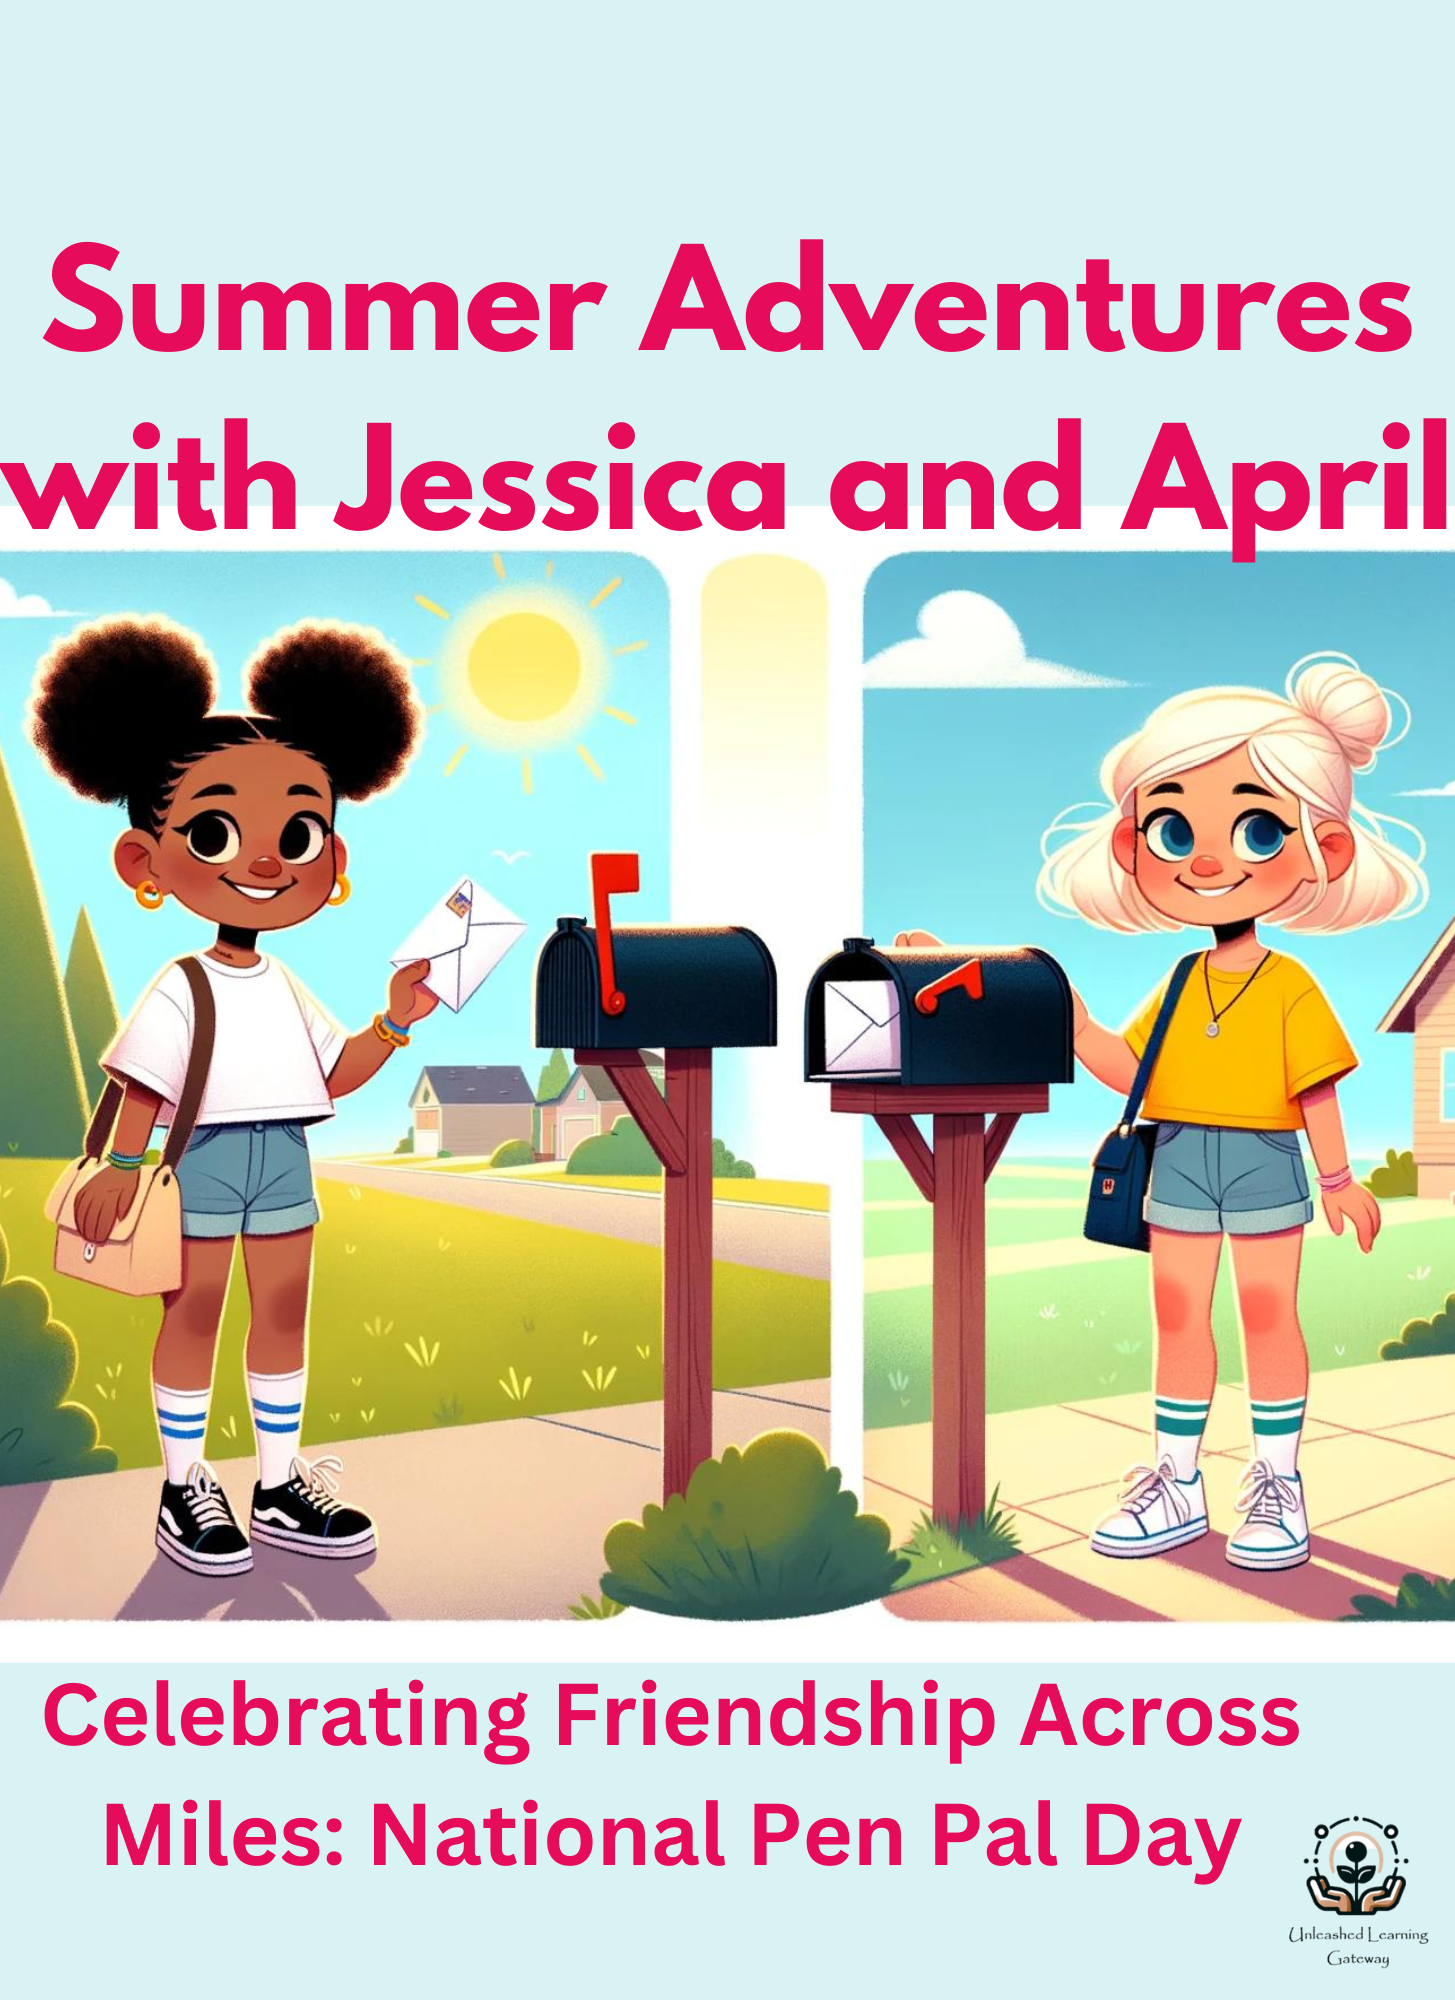 Summer Adventures of Jessica and April